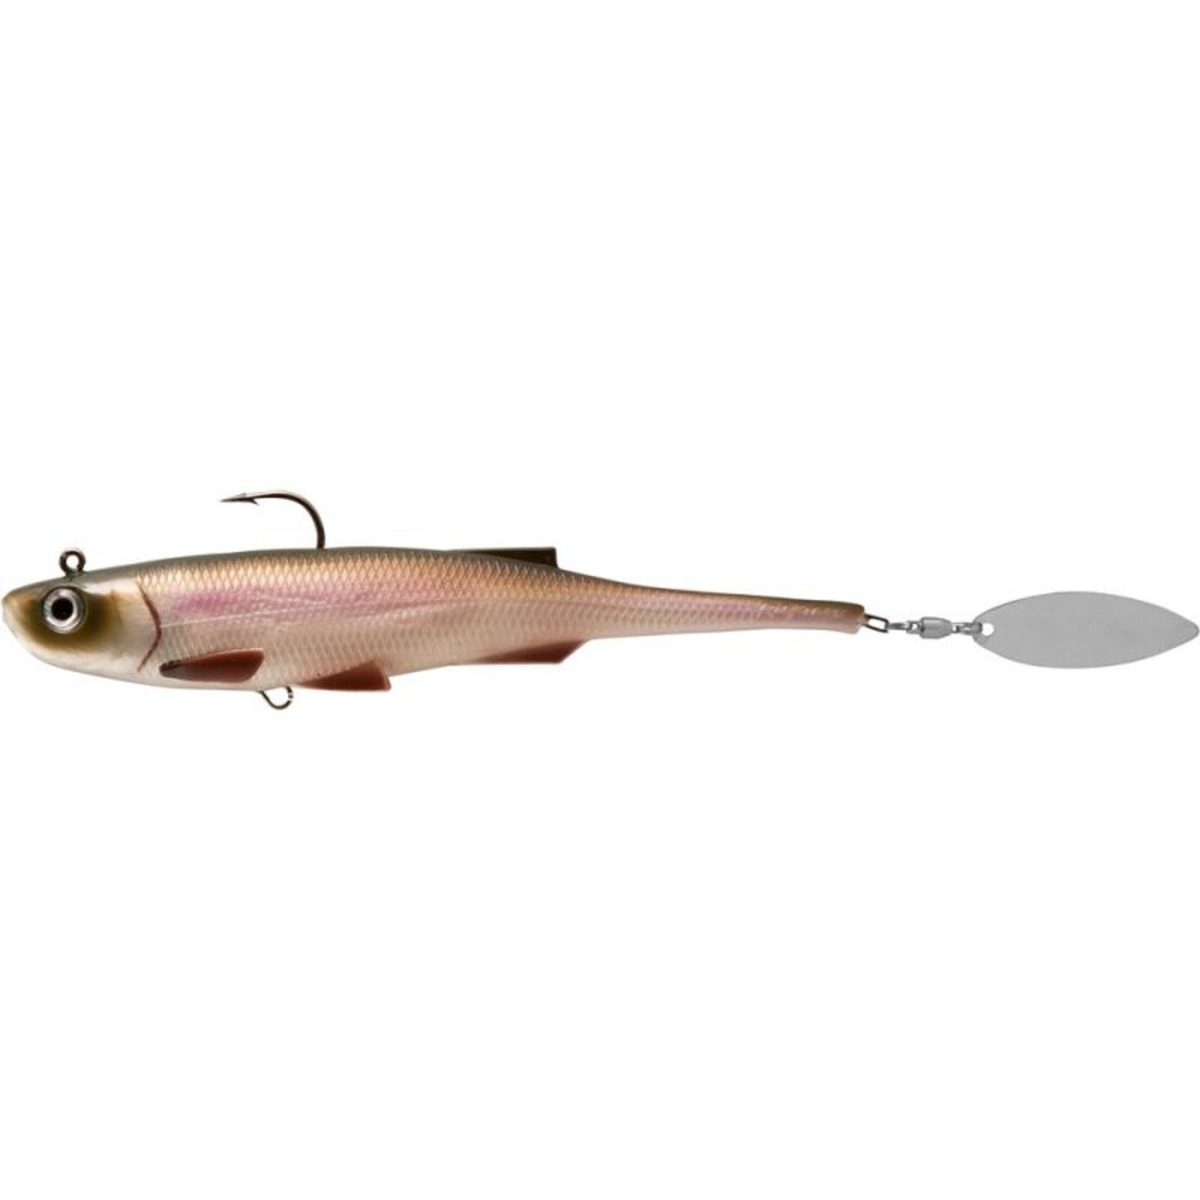 Rapture Mad Spintail Shad - 20.0 g - 100 mm - RD